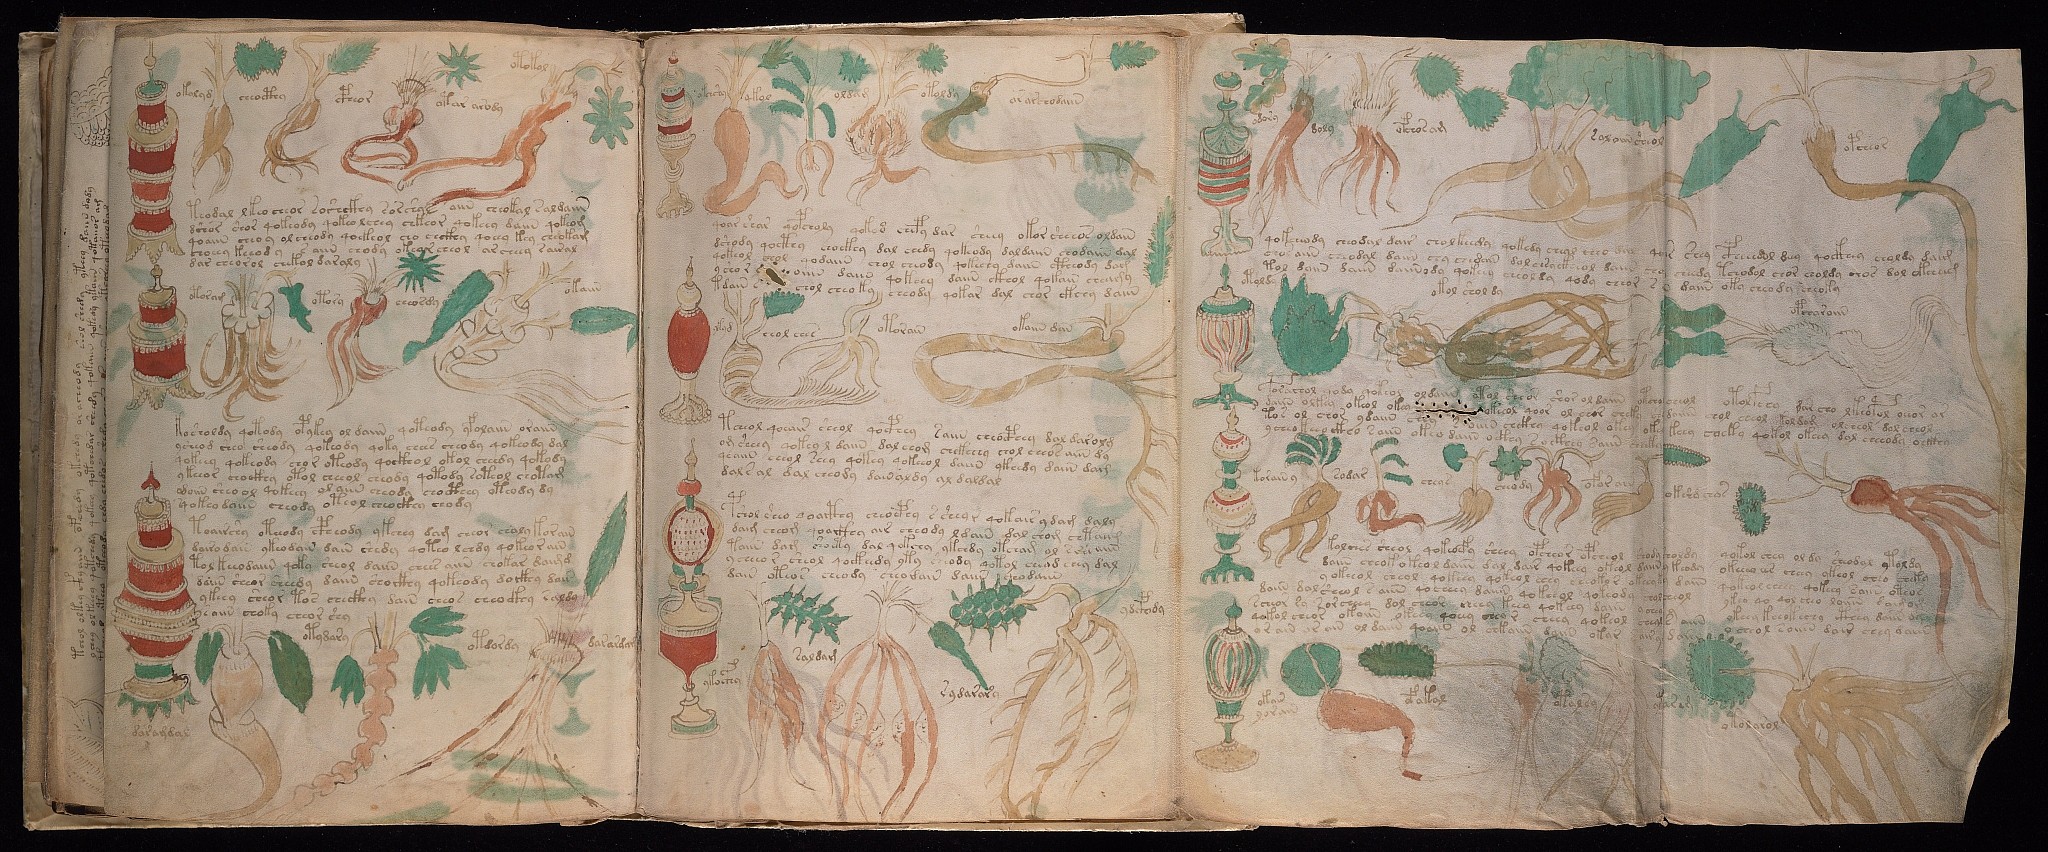  A four-page fold-out from the Voynich Manuscript, scanned by Yale University’s Beinecke Rare Book and Manuscript Library 